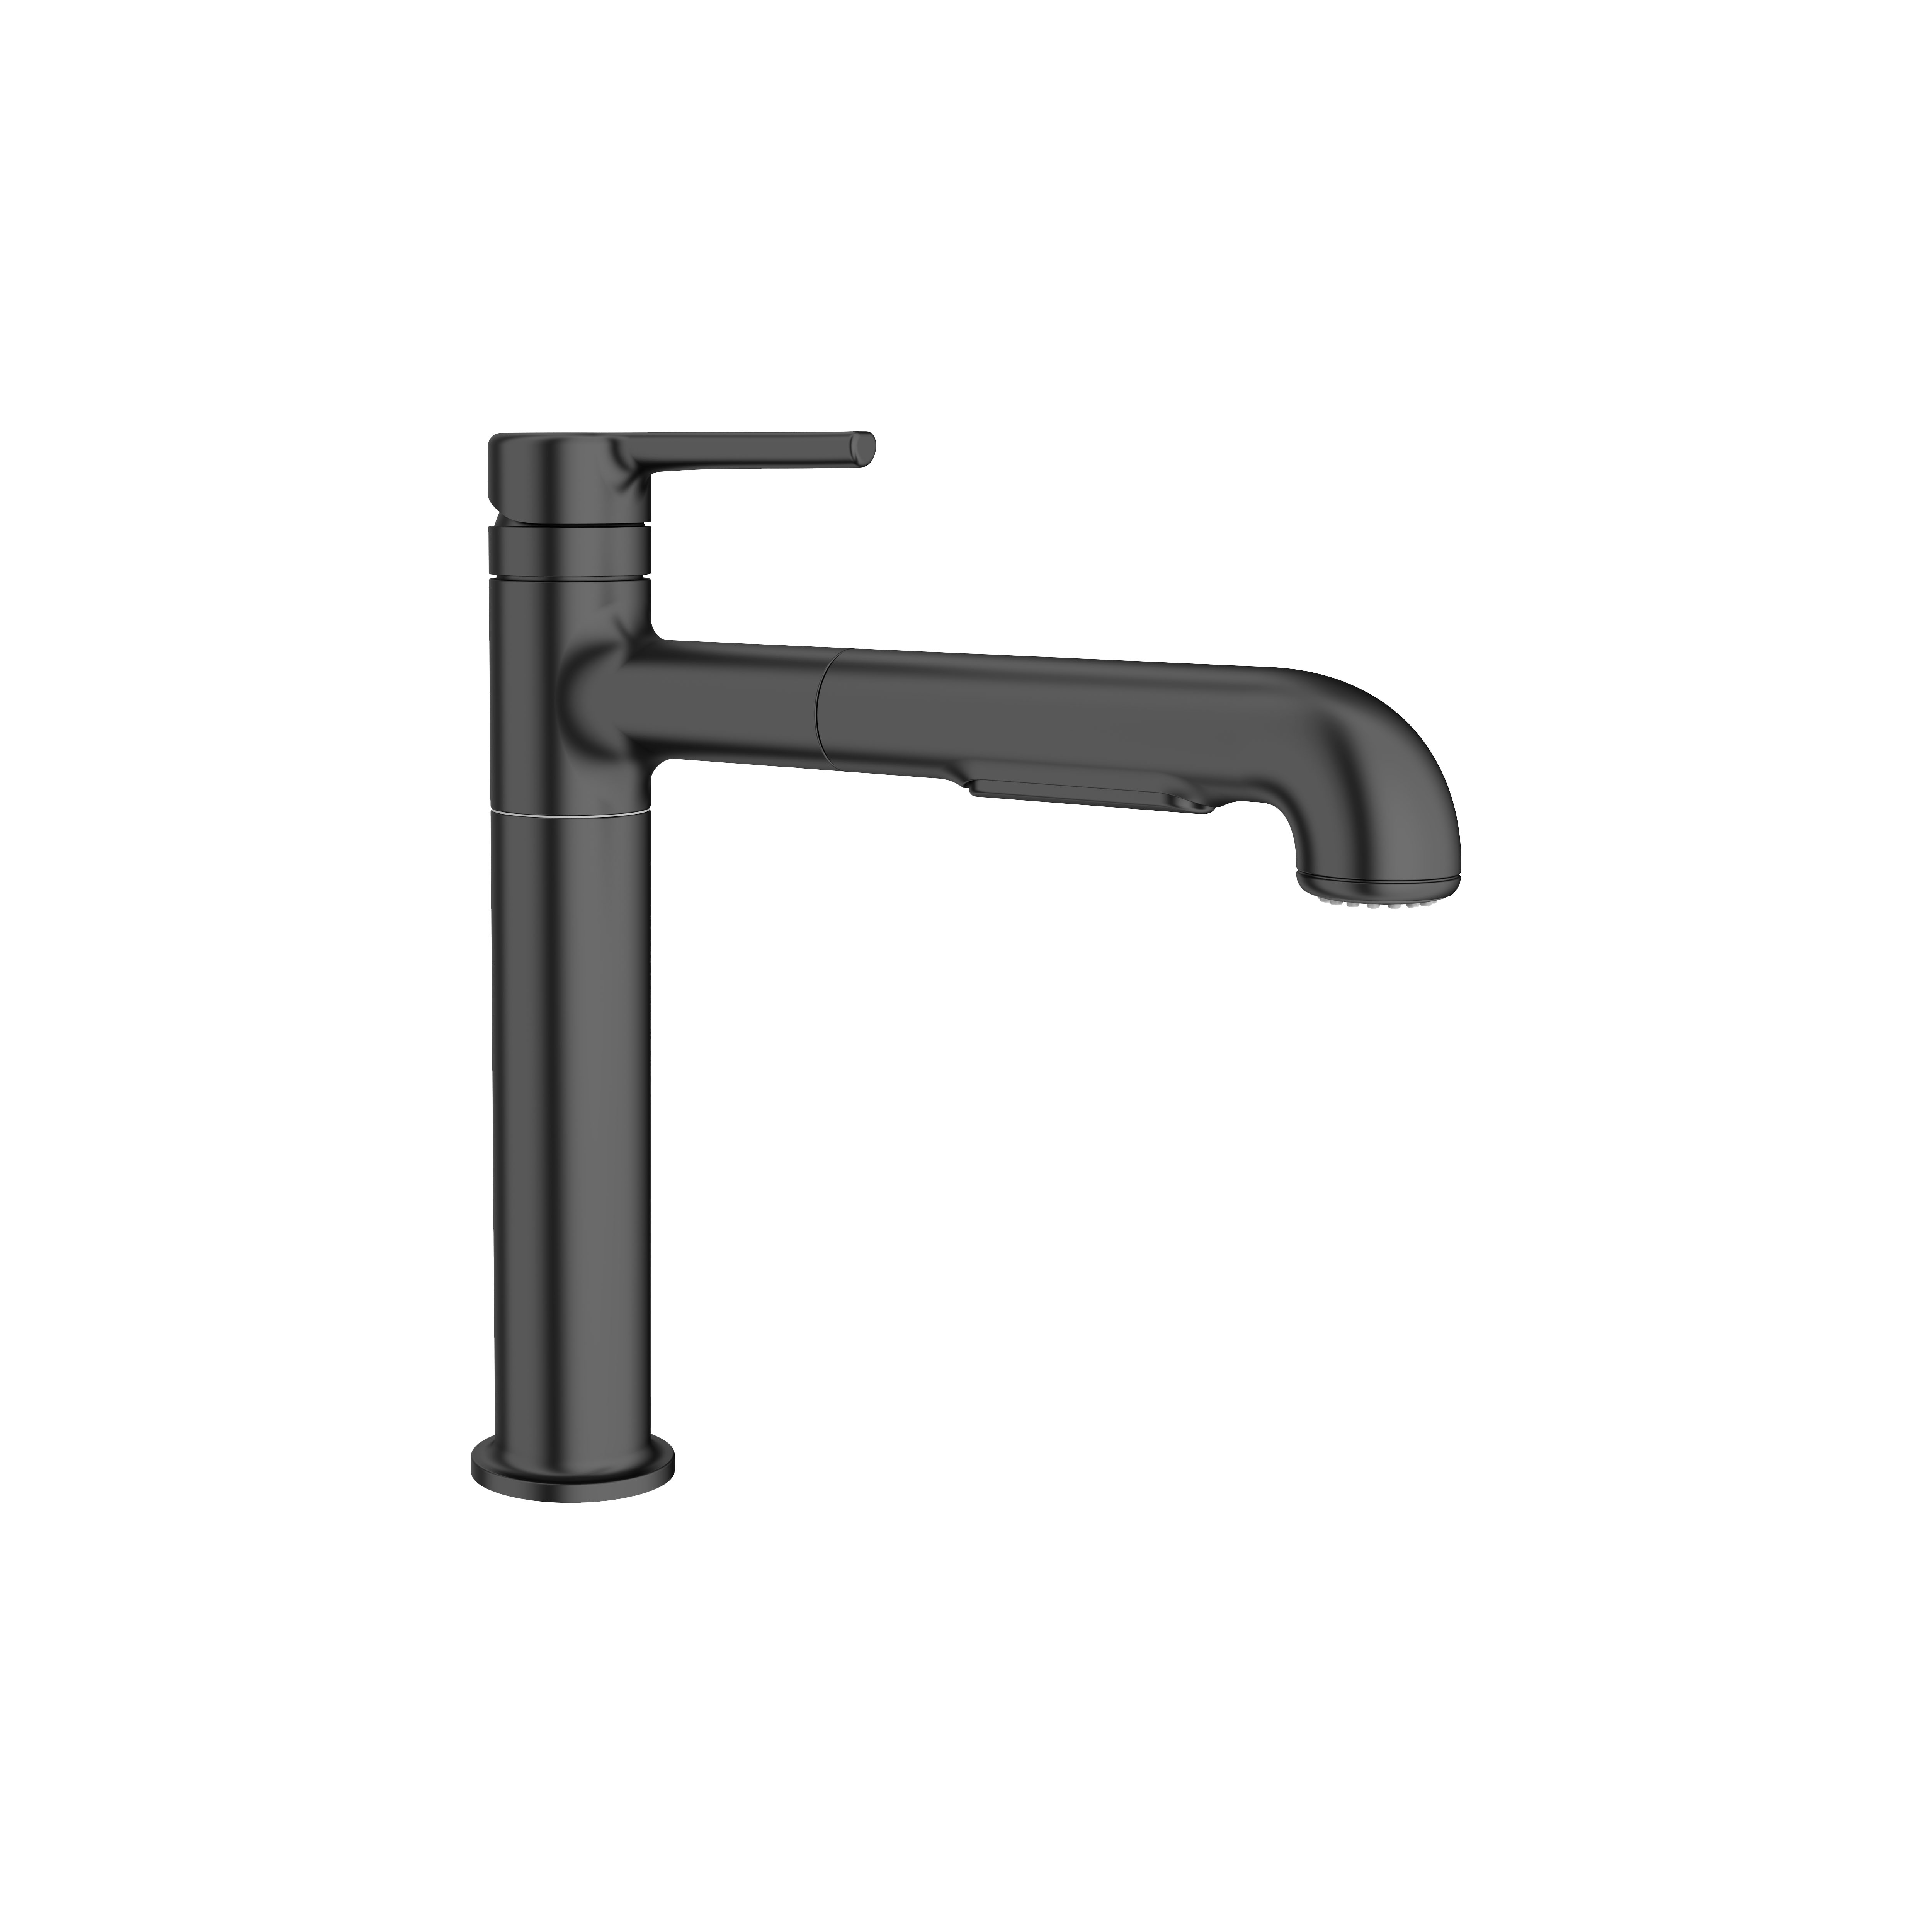 Studio™ S Pull-Out Dual-Spray Kitchen Faucet